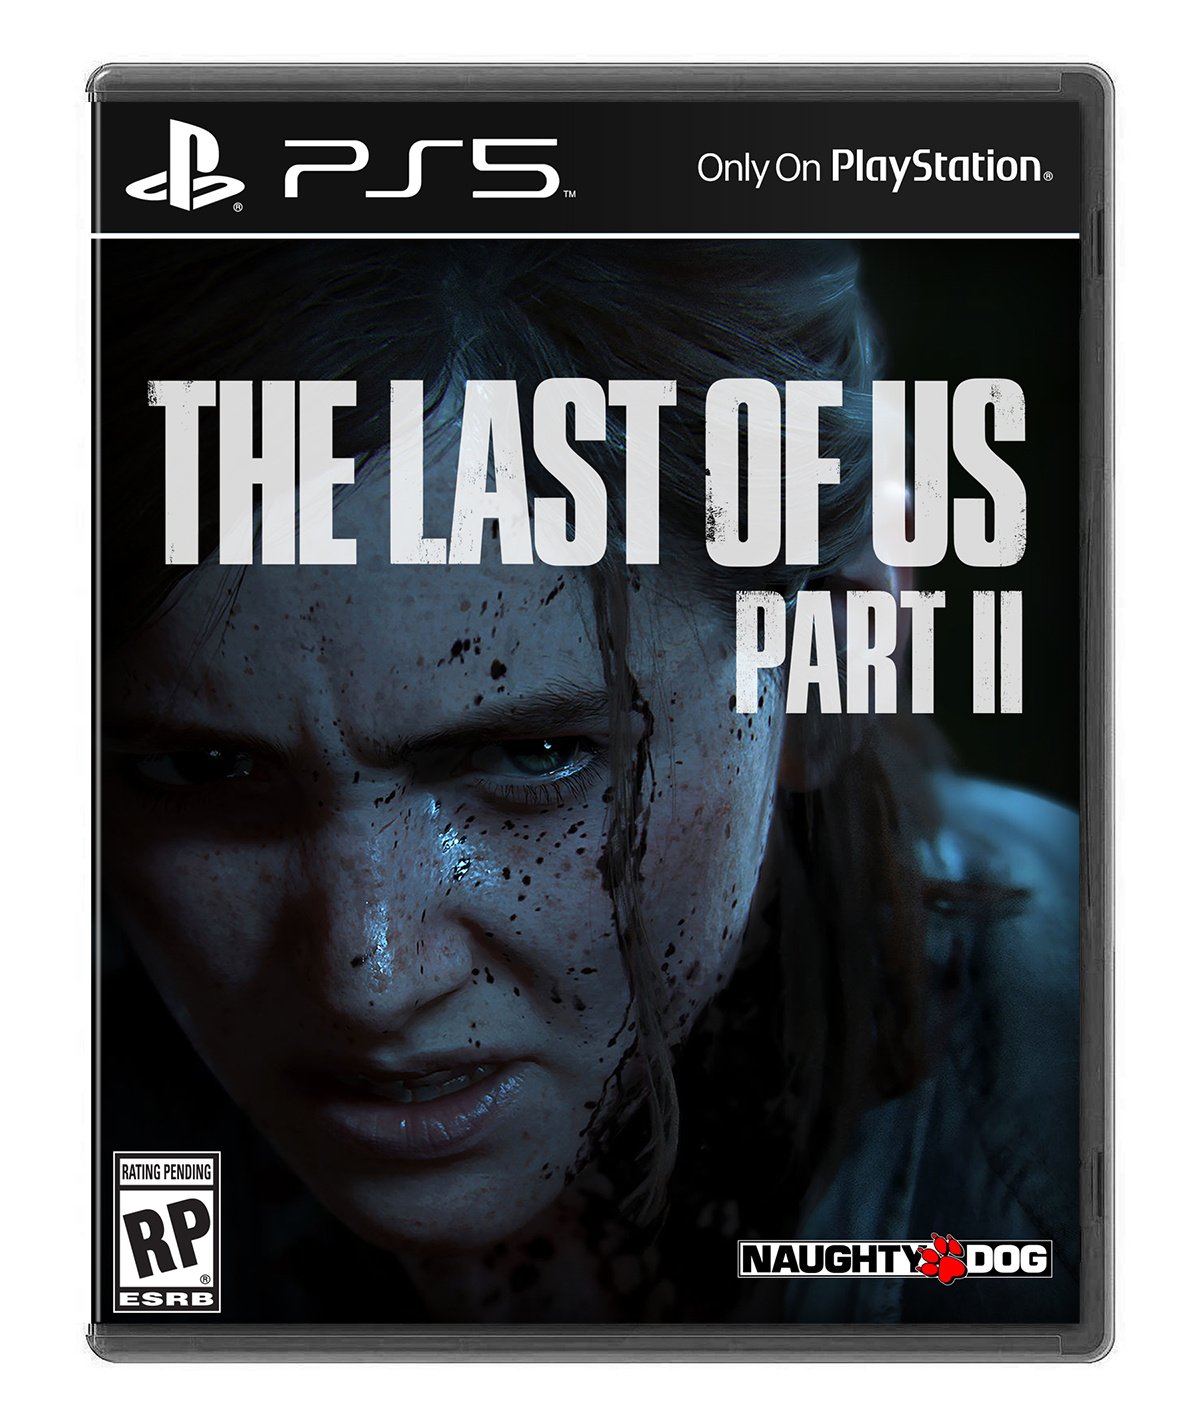 Ps5 Cd Cover - PS5 Console Look